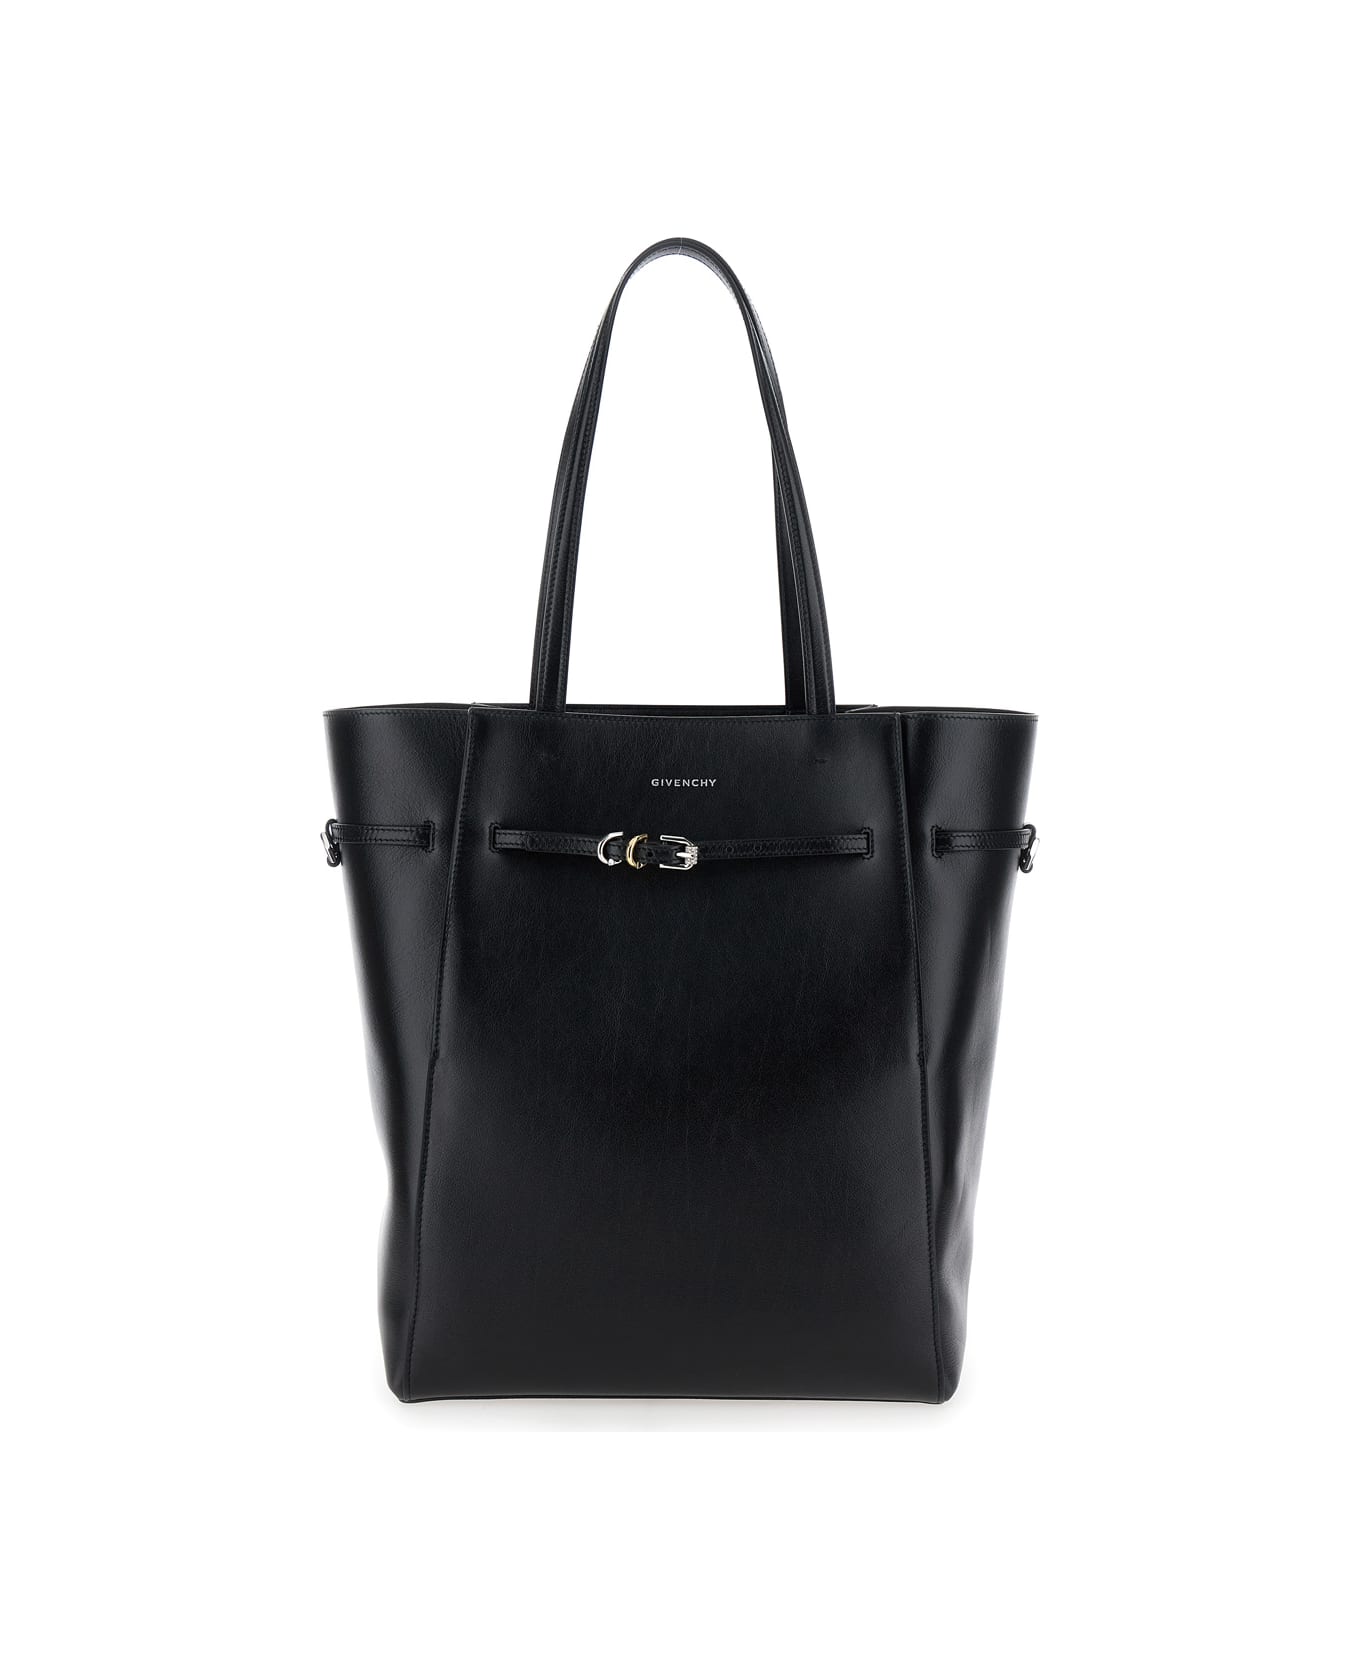 Givenchy 'voyou Medium' Black Tote Bag With Belt Detail In Leather Woman - Black